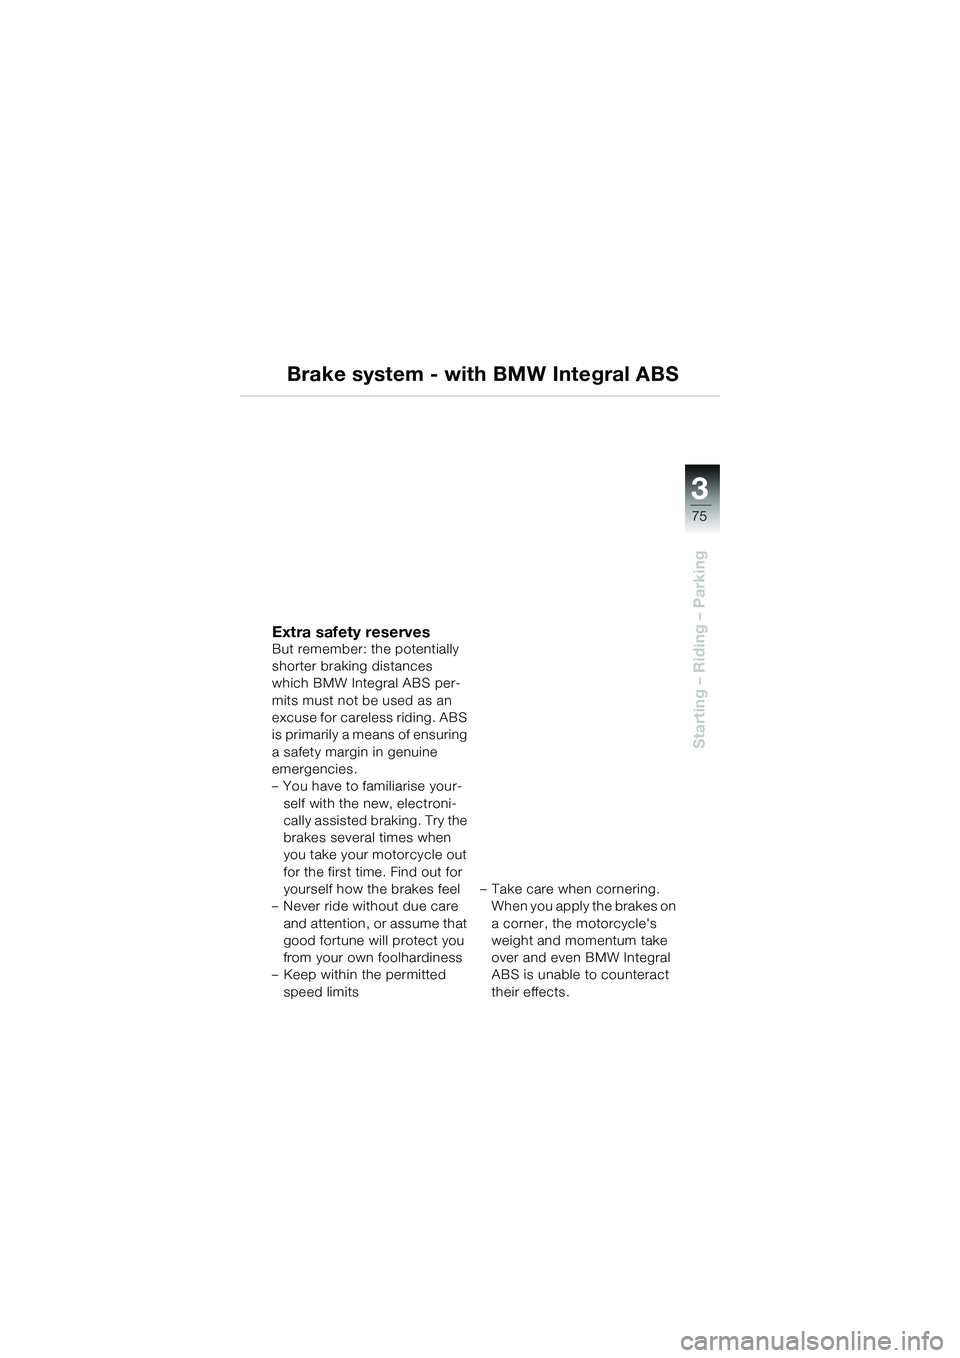 BMW MOTORRAD K 1200 GT 2004  Riders Manual (in English) 3
75
Starting – Riding – Parking
Brake system - with BMW Integral ABS
Extra safety reservesBut remember: the potentially 
shorter braking distances 
which BMW Integral ABS per-
mits must not be us